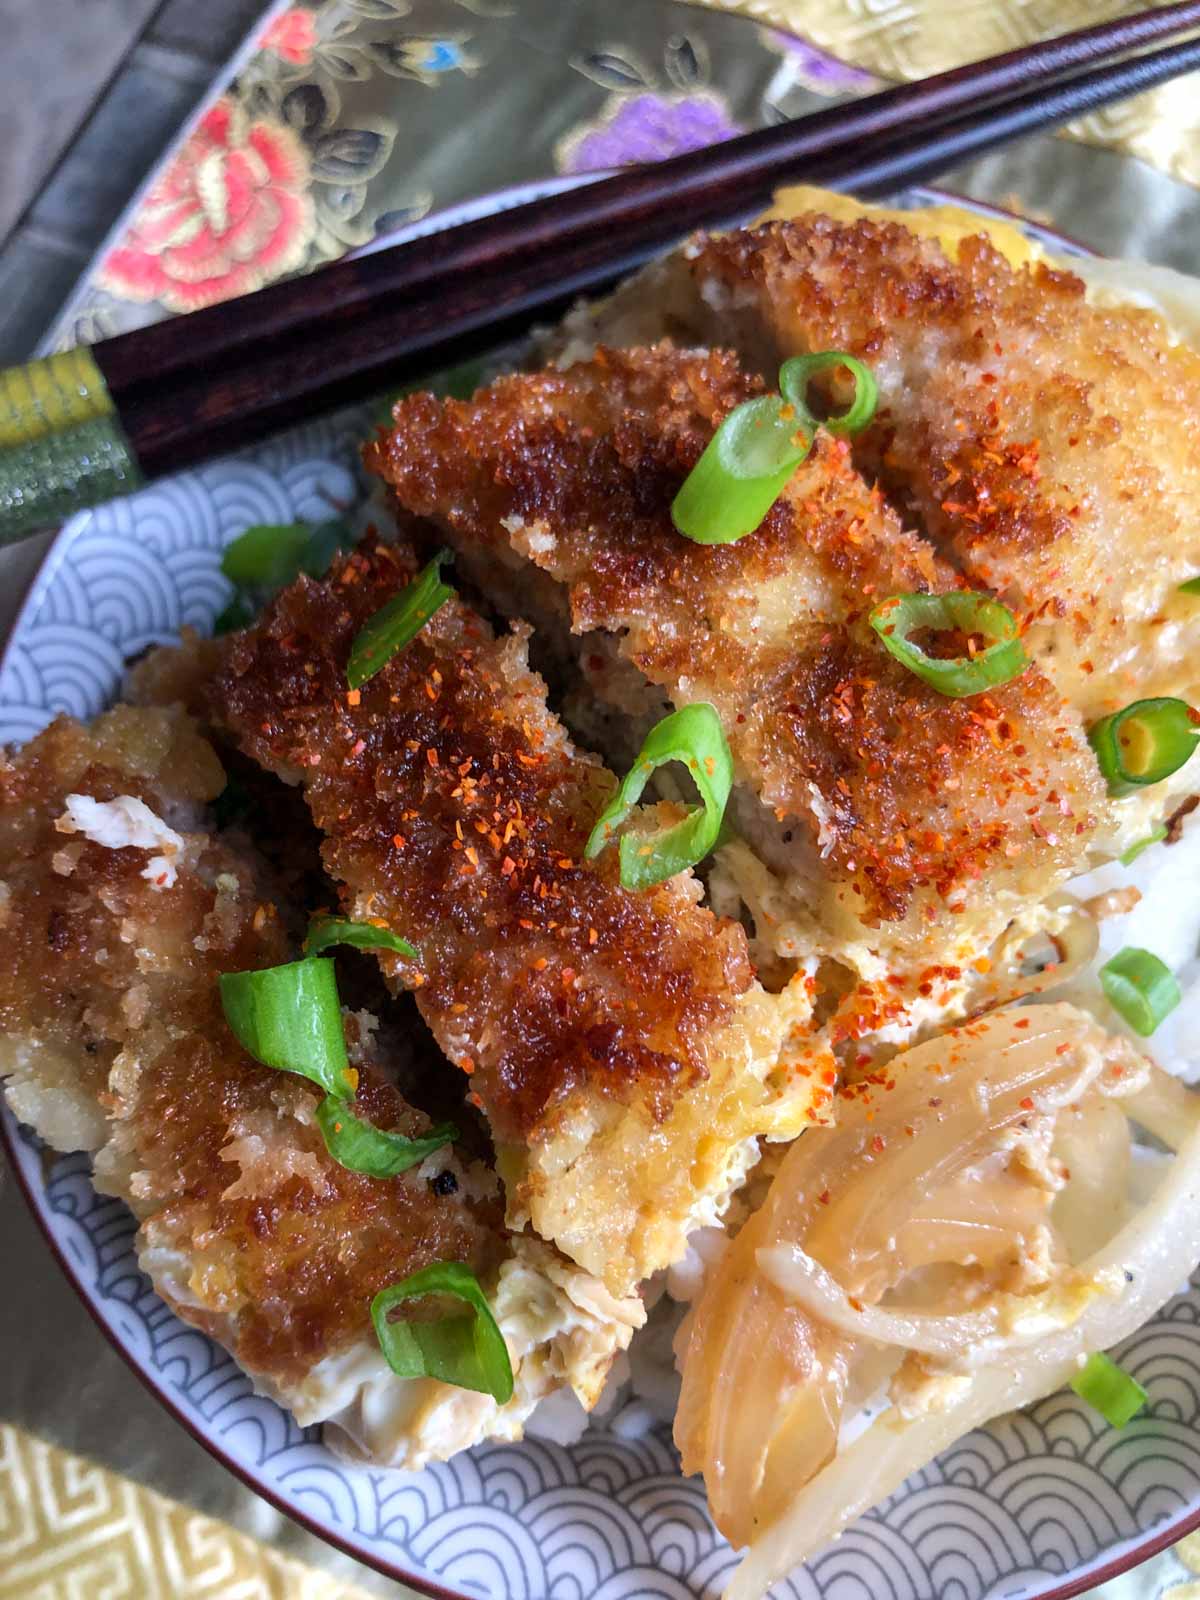 Breaded pork chop pieces on top of rice in a bowl and green onions garnishing the top of the pork chop pieces with a set of chopsticks resting on the left side of the bowl.